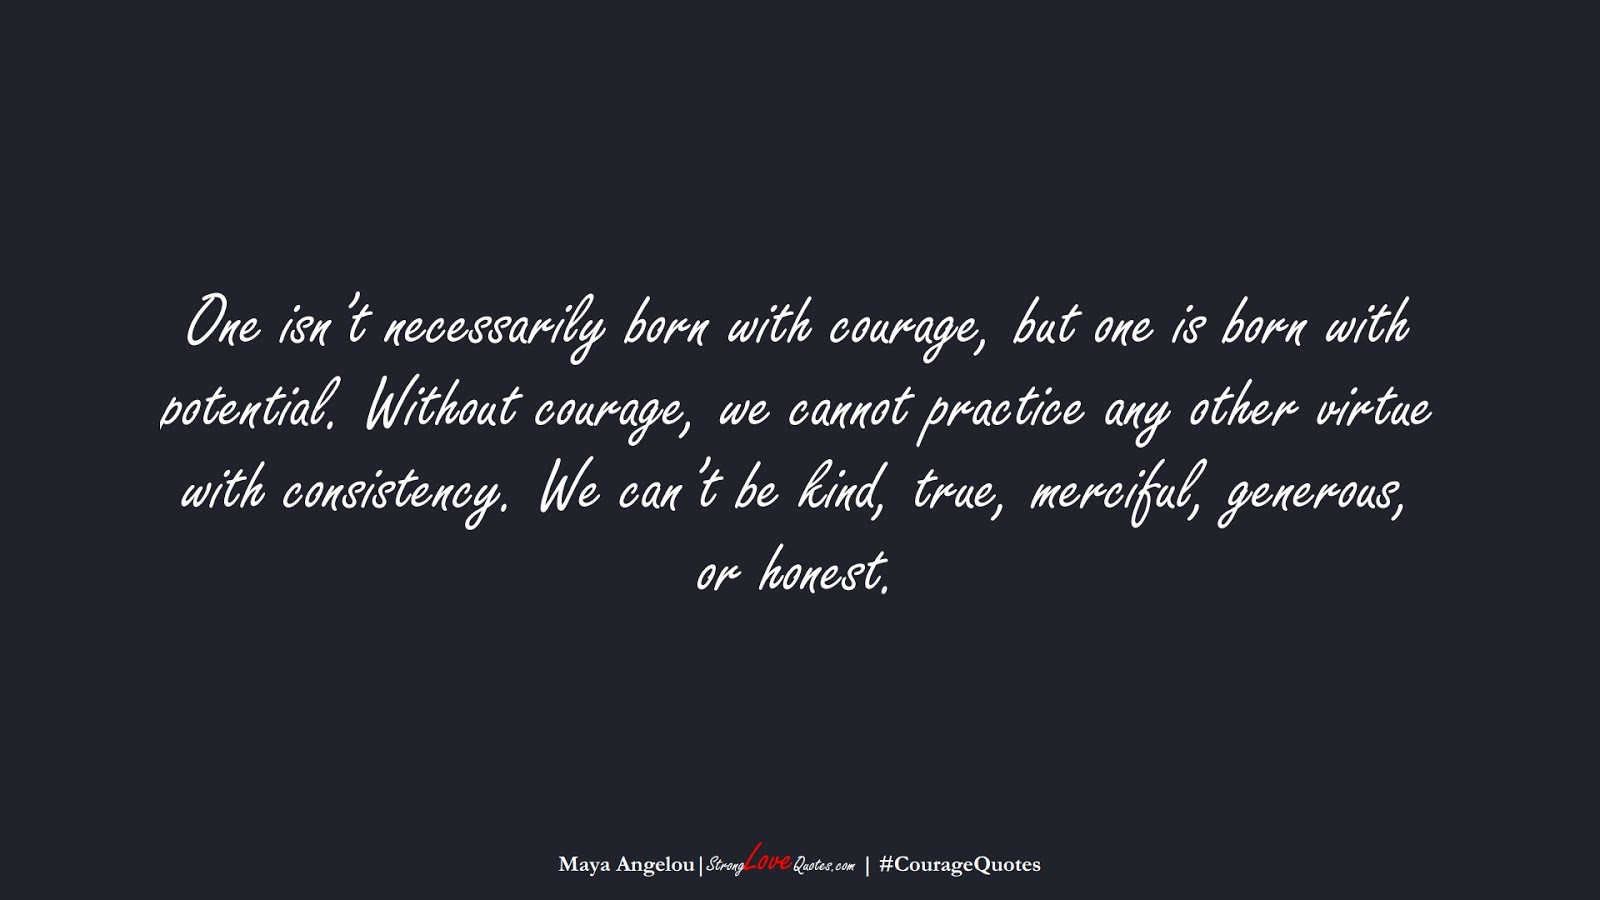 One isn’t necessarily born with courage, but one is born with potential. Without courage, we cannot practice any other virtue with consistency. We can’t be kind, true, merciful, generous, or honest. (Maya Angelou);  #CourageQuotes